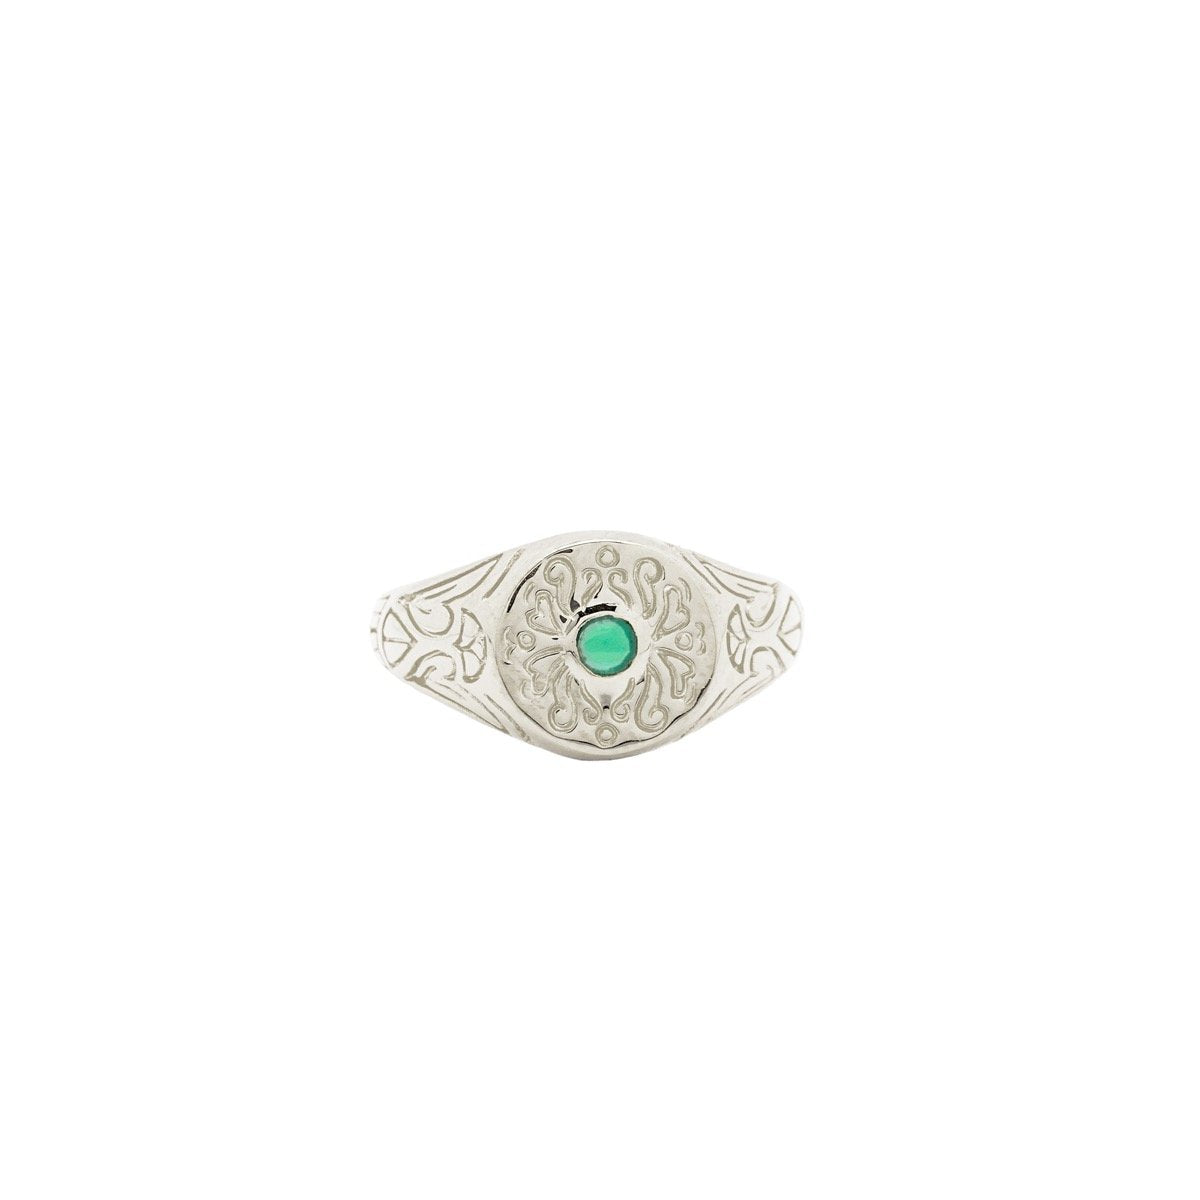 Hunt Of Hounds Chantilly Ring in Silver with Green Agate. Decorative plate design.